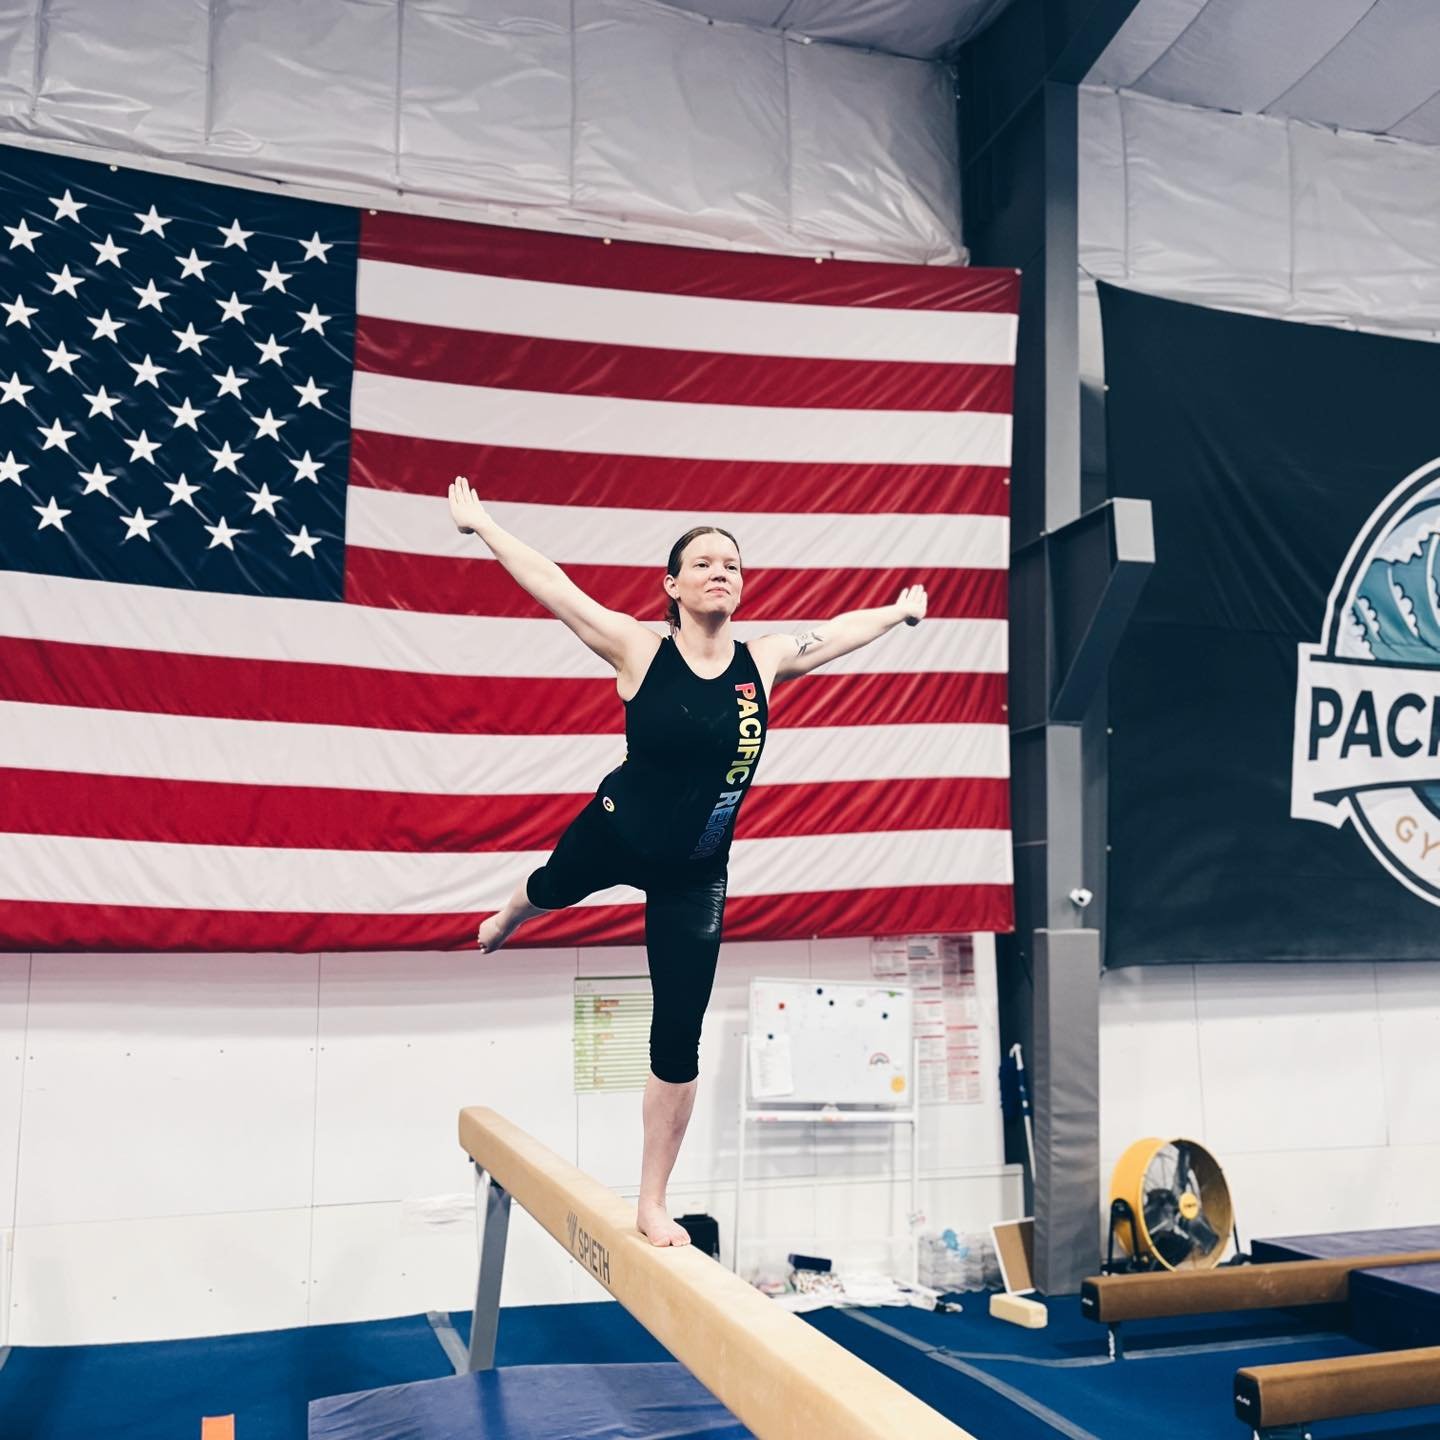 Our Adult Gymnastics Team will be competing this weekend in Rancho Mirage, CA at the AAU Western Regionals Championships! They have been training all season and are excited to compete again! #Train2Reign👑

#adultgymnastics | #AAUGymnastics